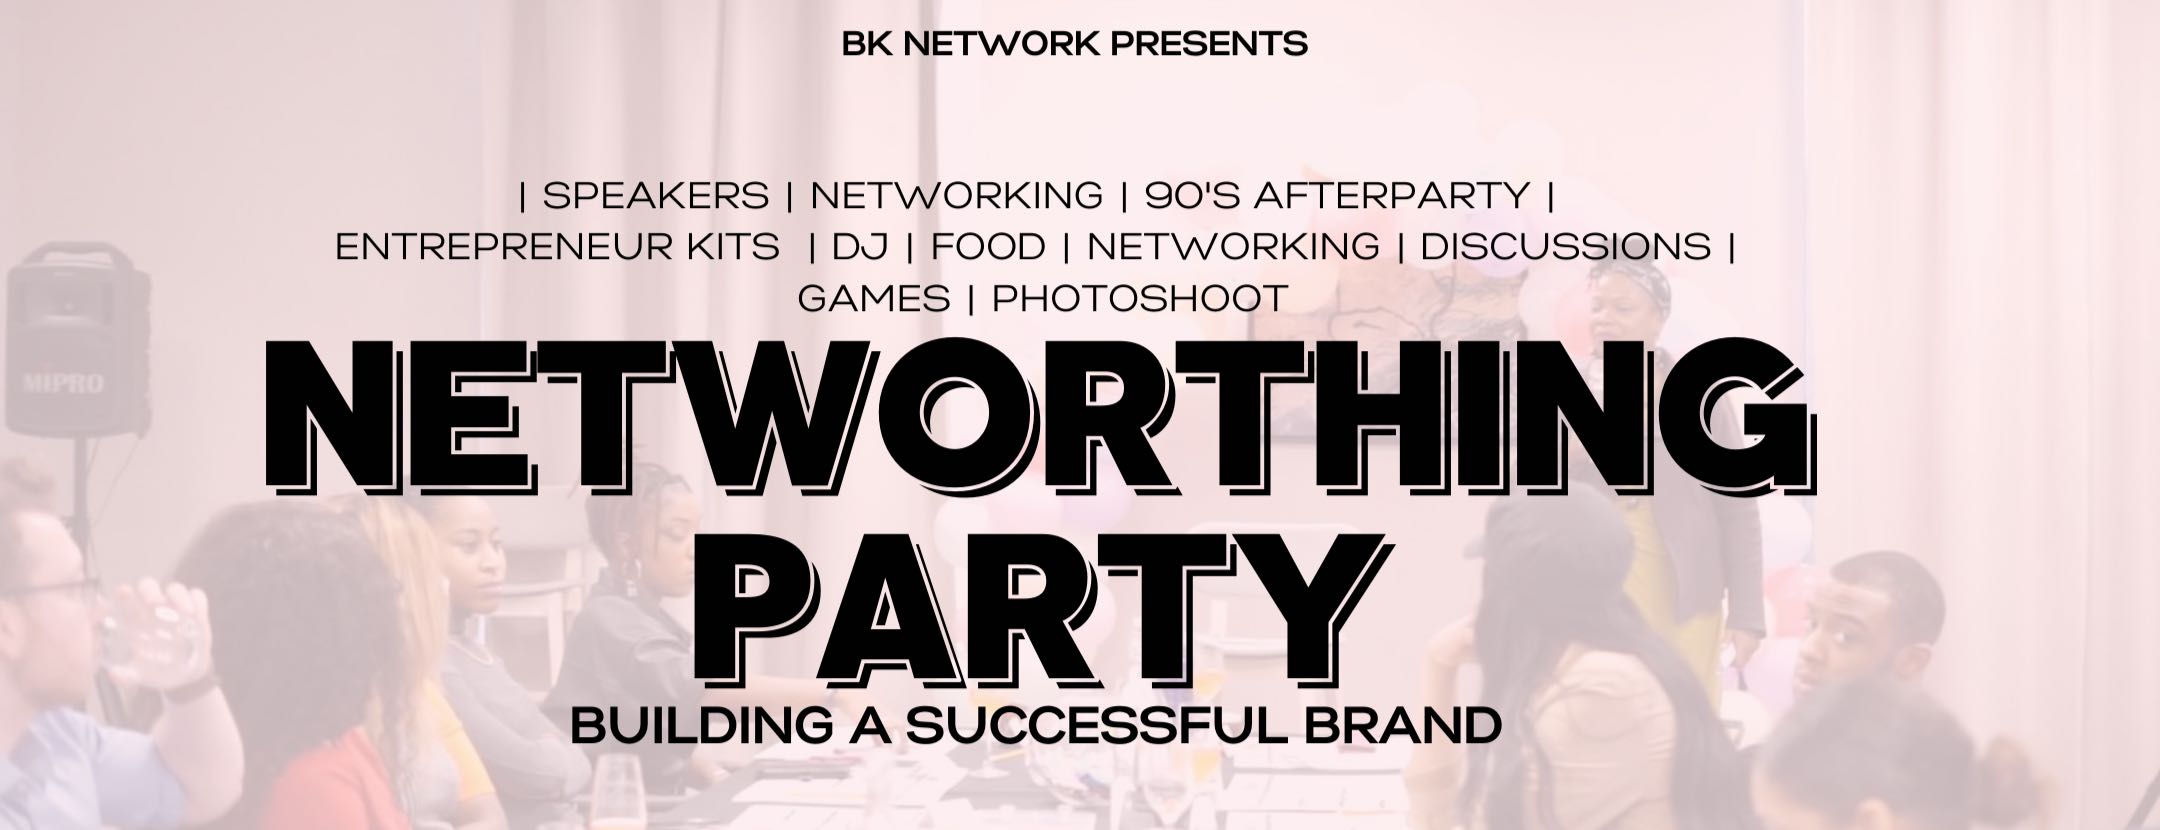 Networthing Party: Building A Successful Brand